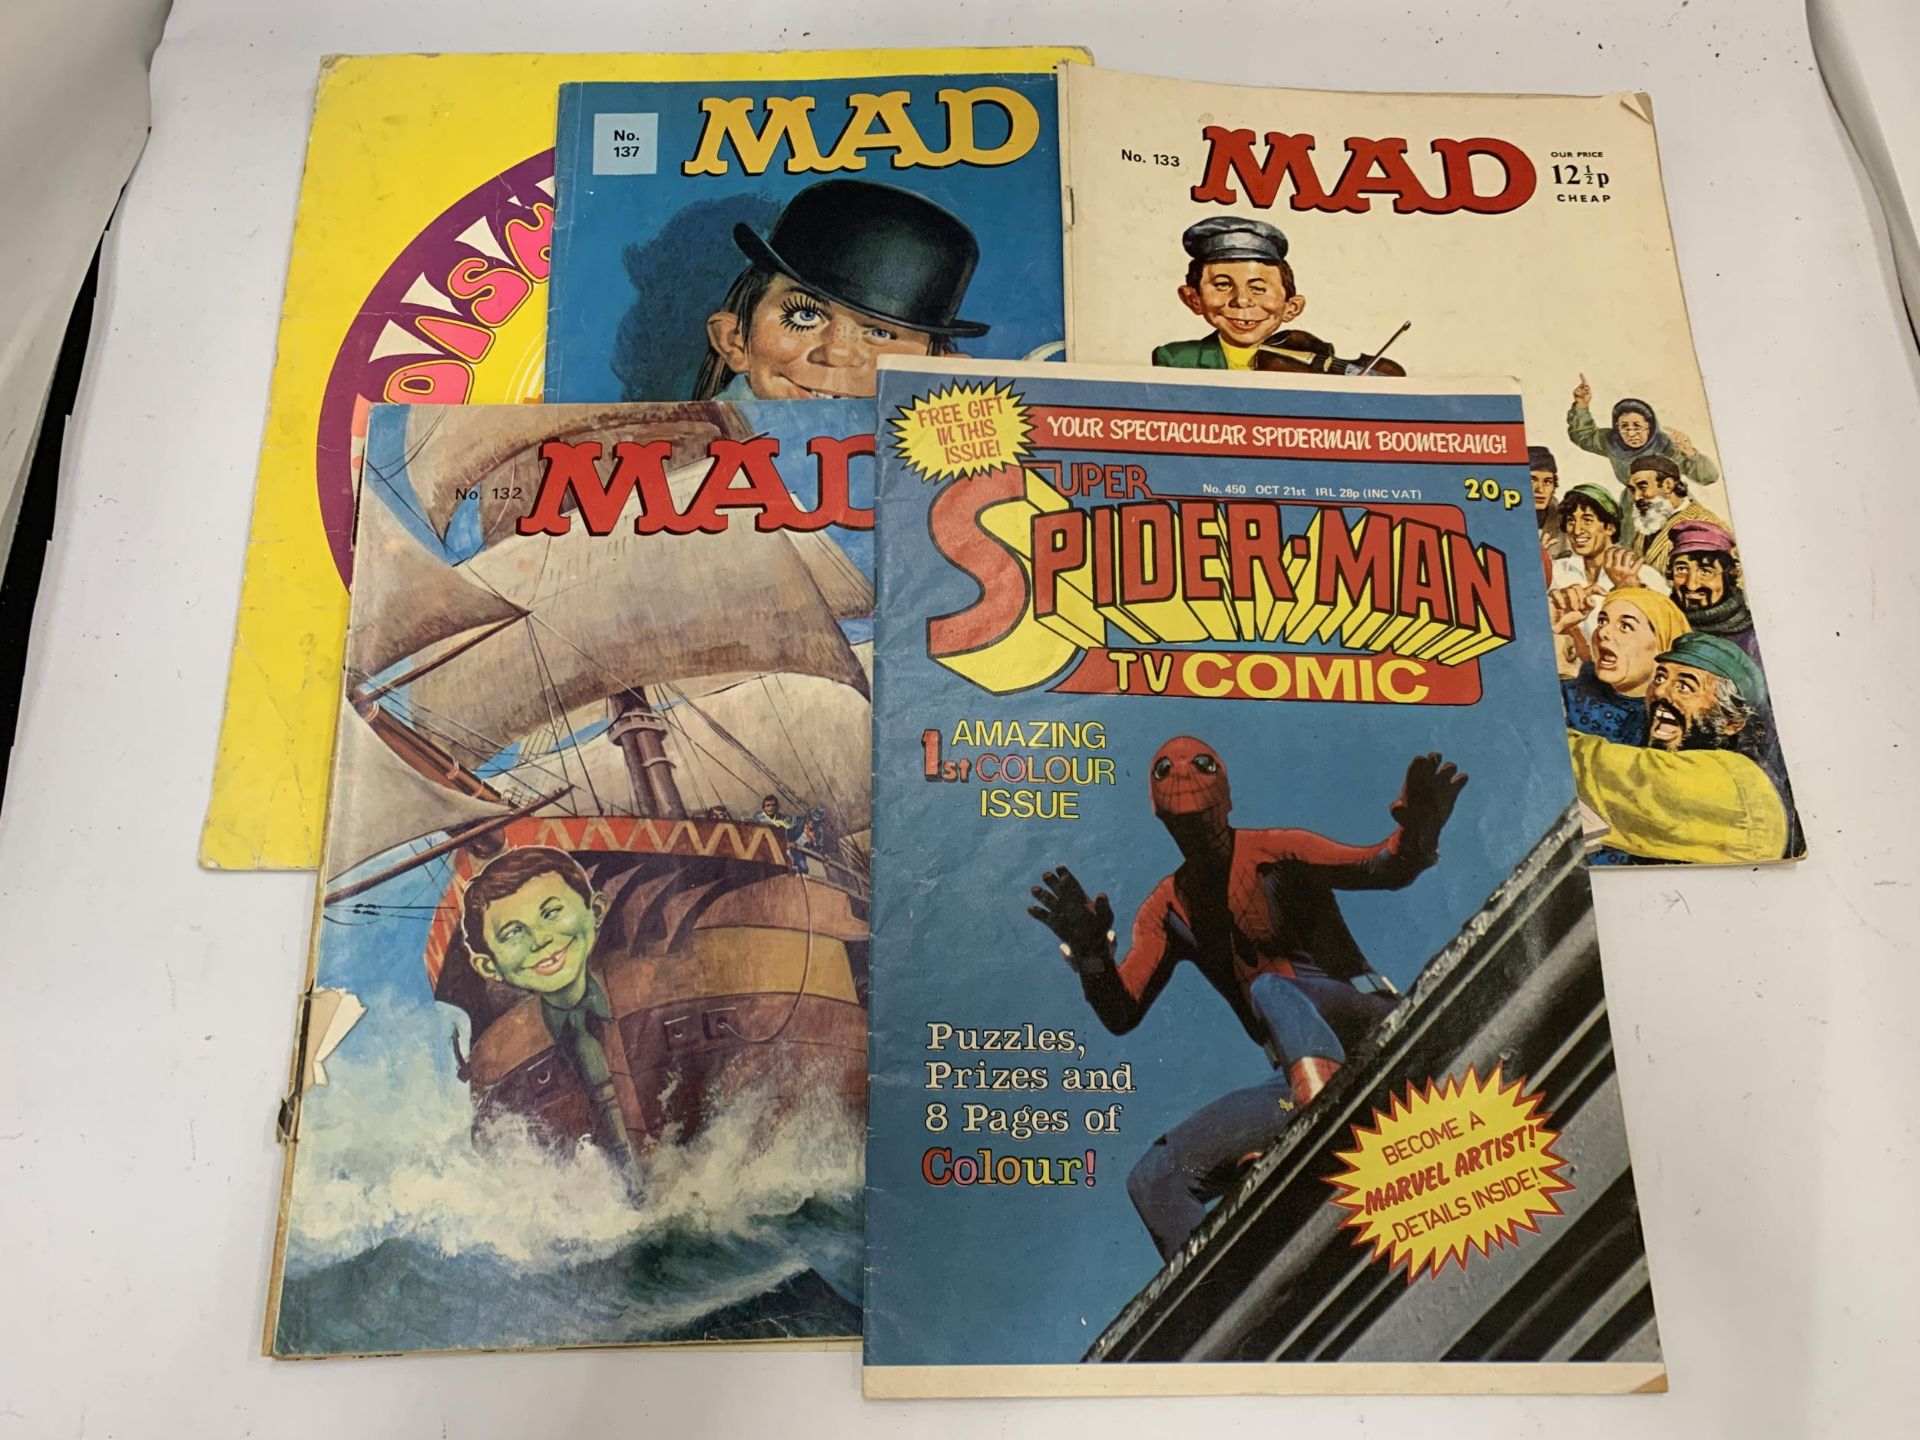 A QUANTITY OF VINTAGE COMICS TO INCLUDE DISNEY MOVEE CAVALCADE, MAD AND SUPER SPIDERMAN - 5 IN TOTAL